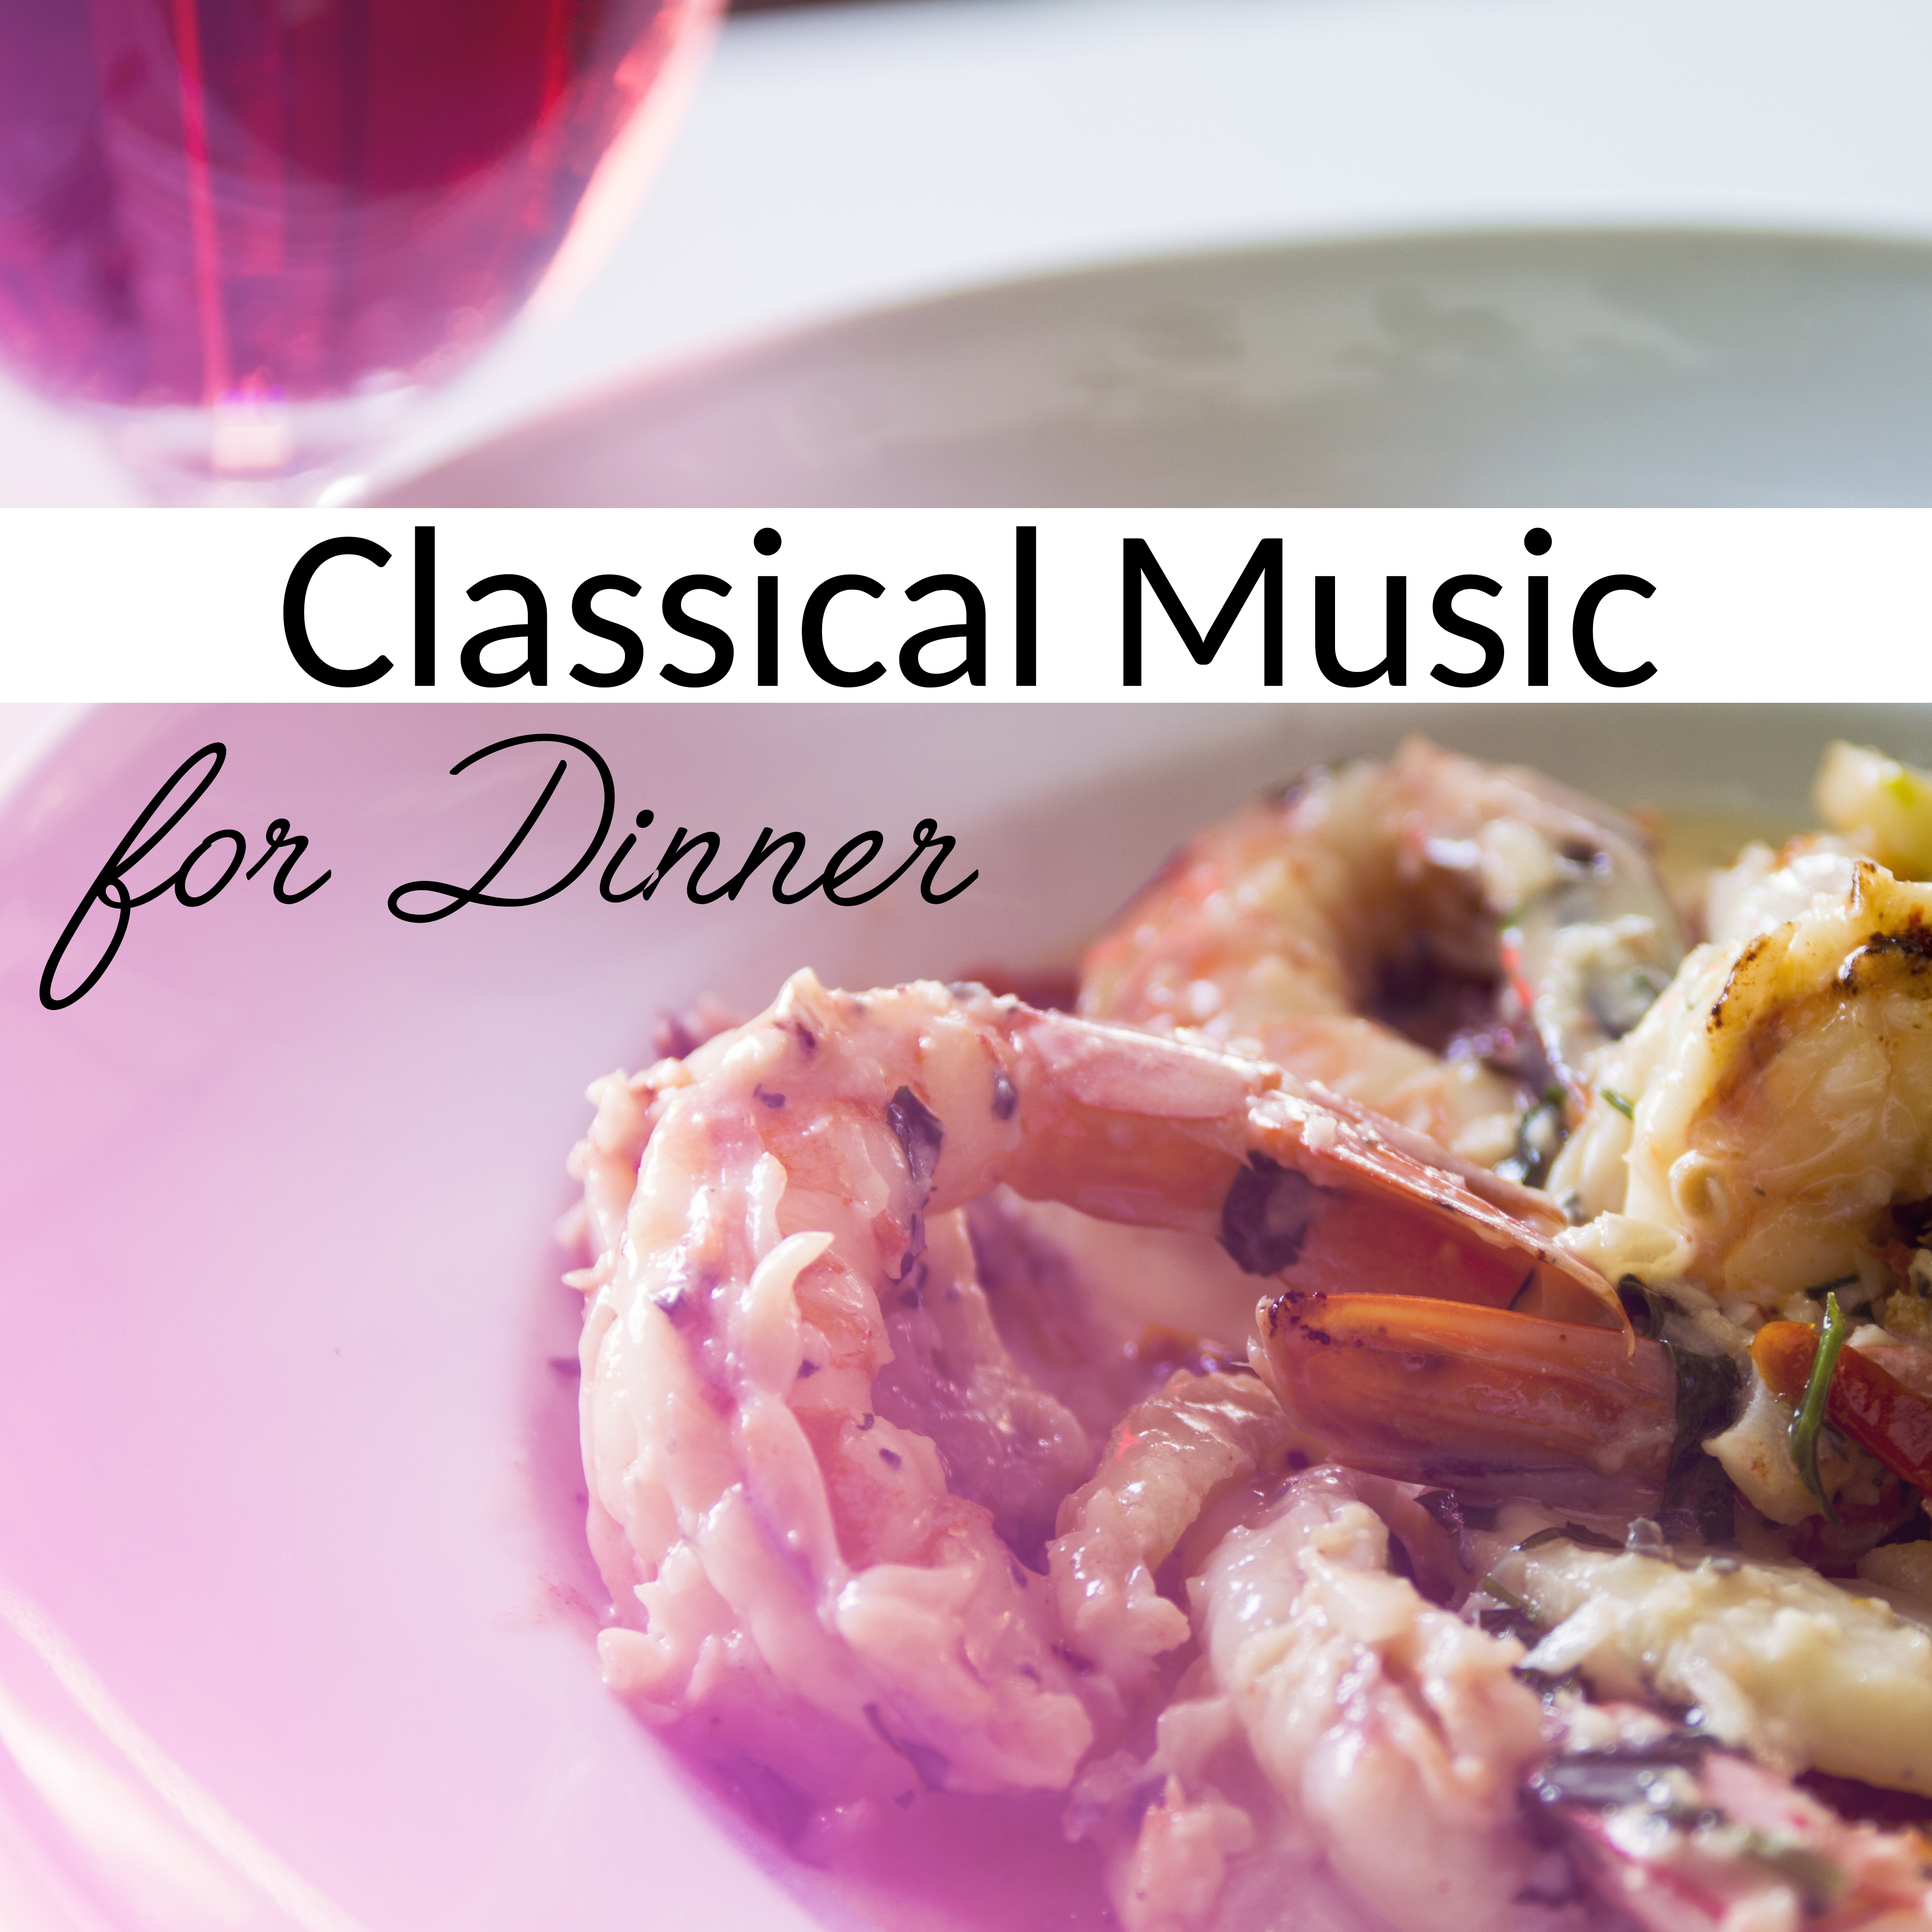 Classical Music for Dinner  Best Classical Collection for Family Dinner, Dinner by Candlelight